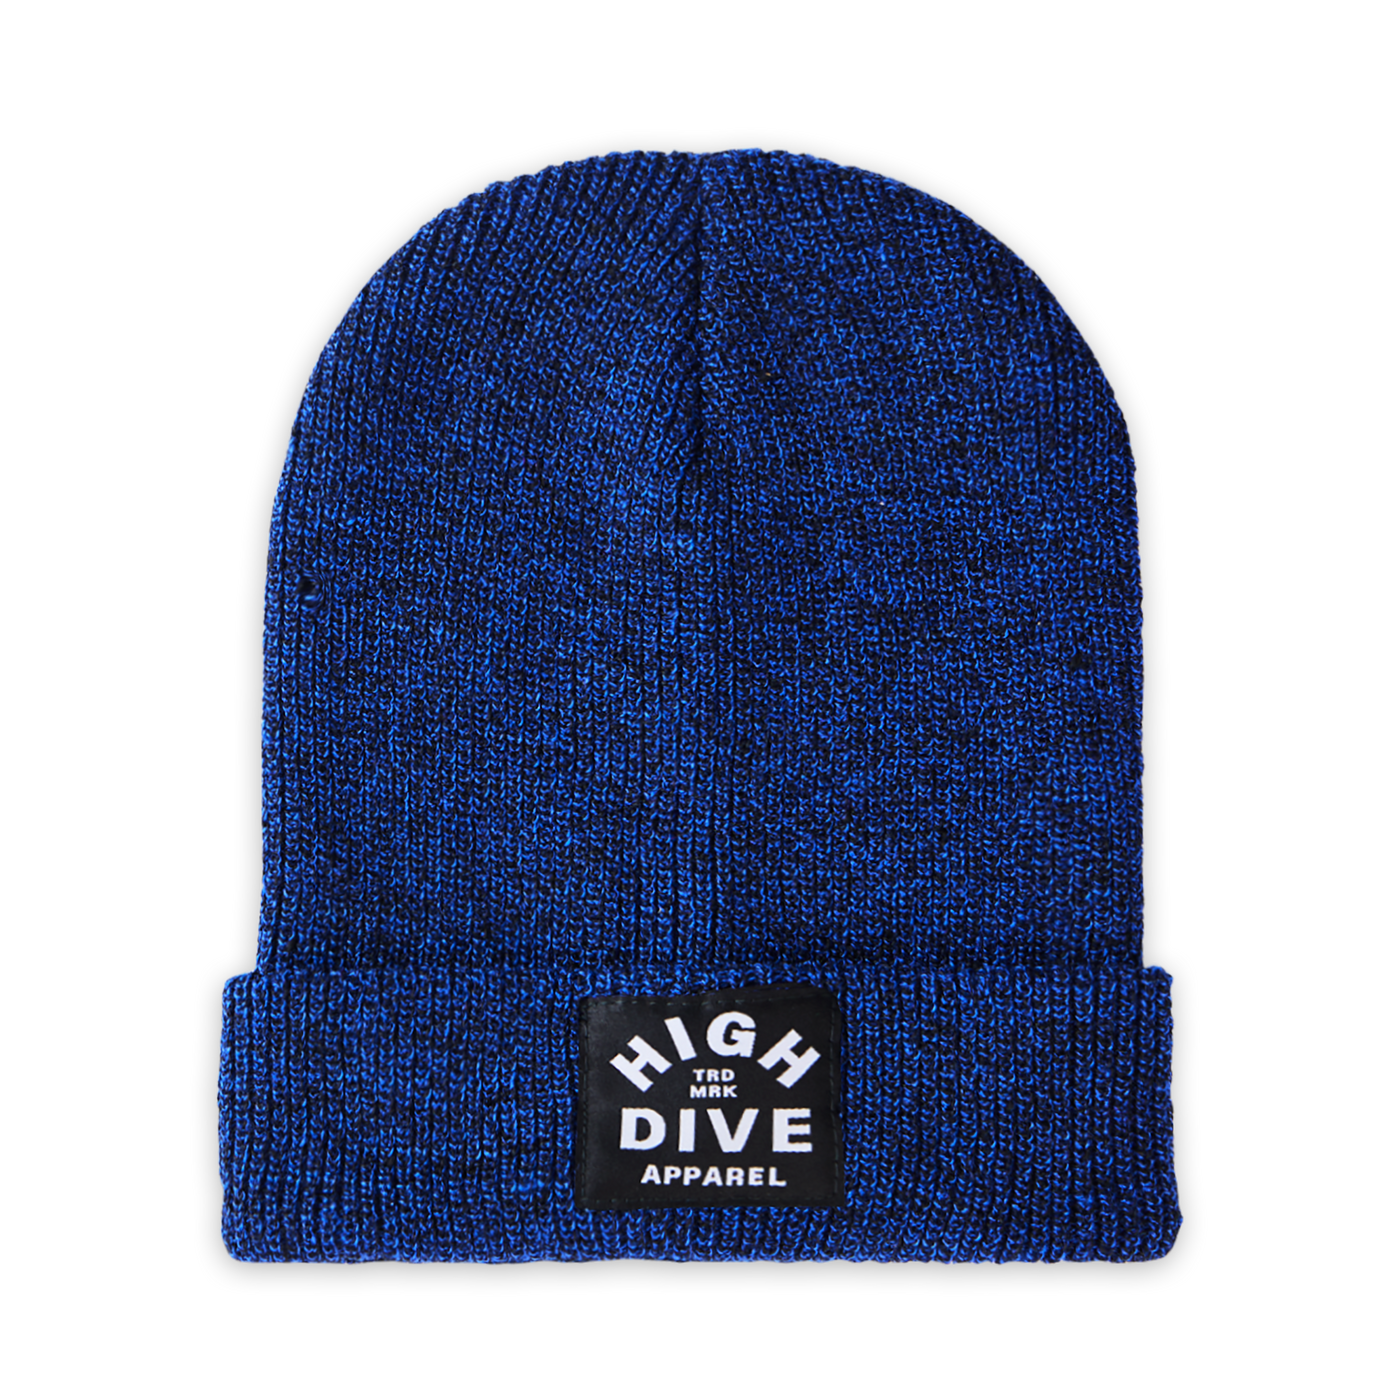 Antique Royal Blue Beanie With Black HDA Label